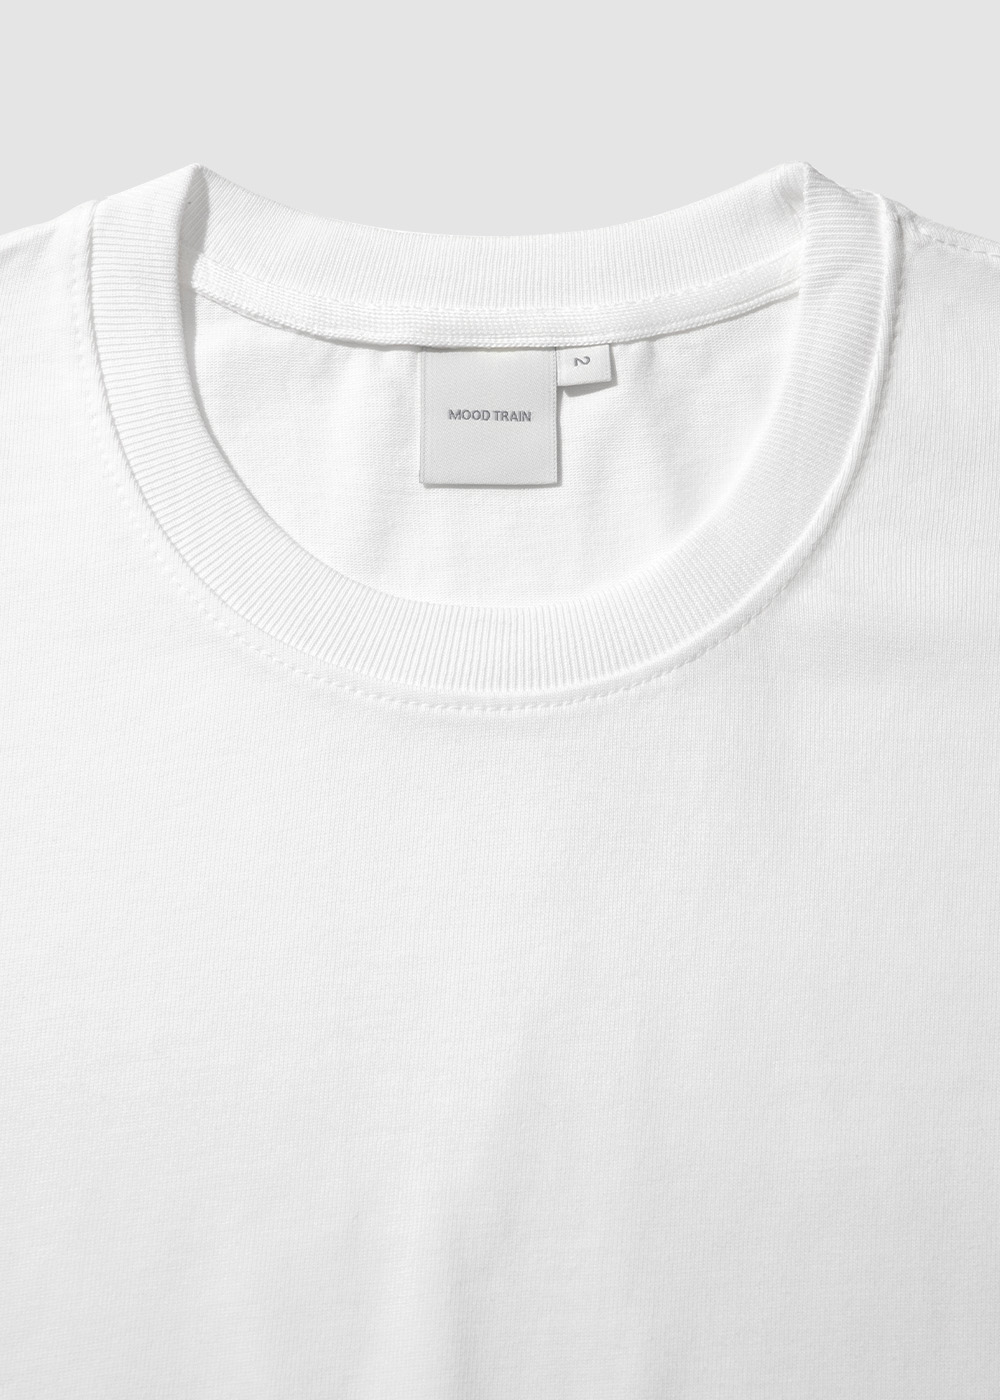 A. Silked Combed Cotton 100% 20/2 Single T-shirt _ white